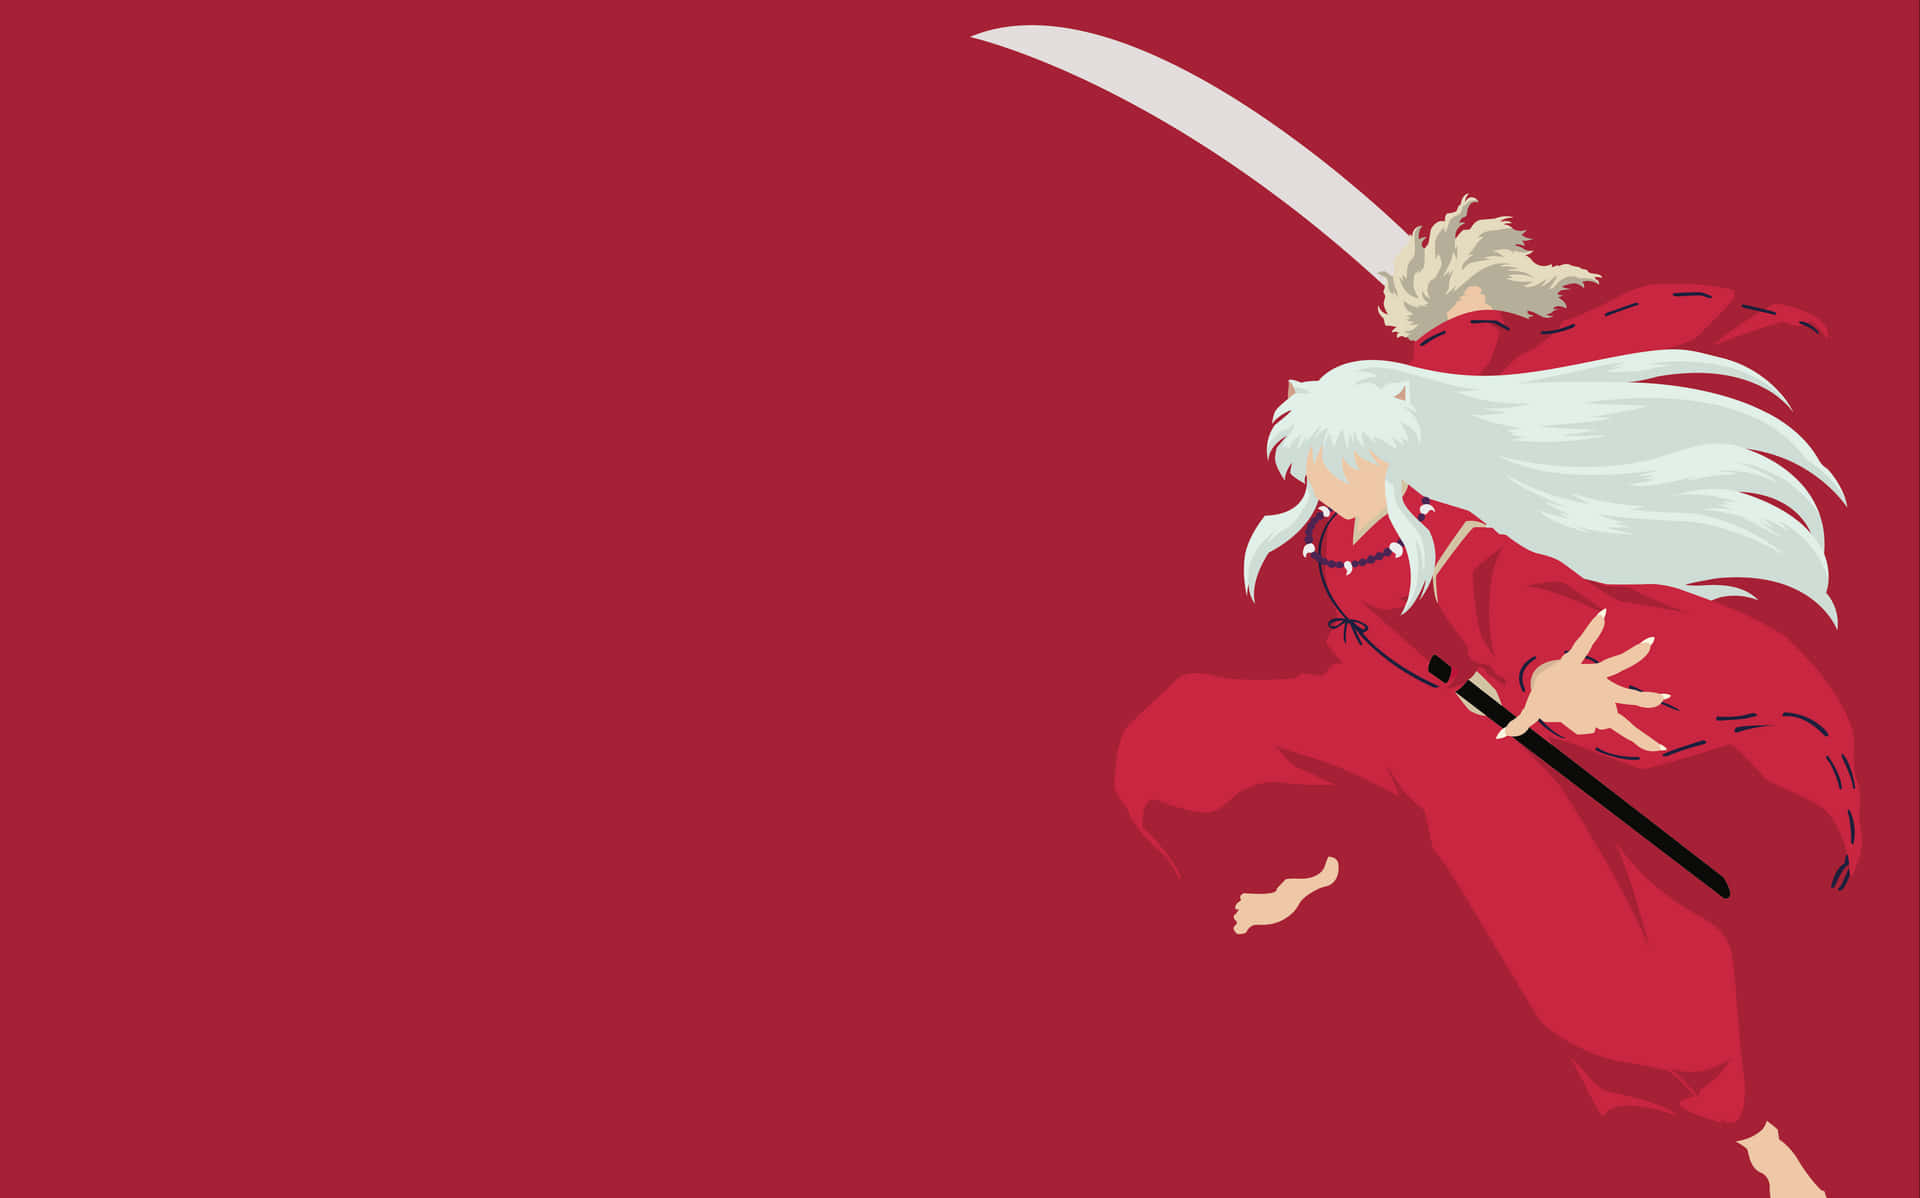 Inuyasha, the half-demon in search of the Sacred Jewel